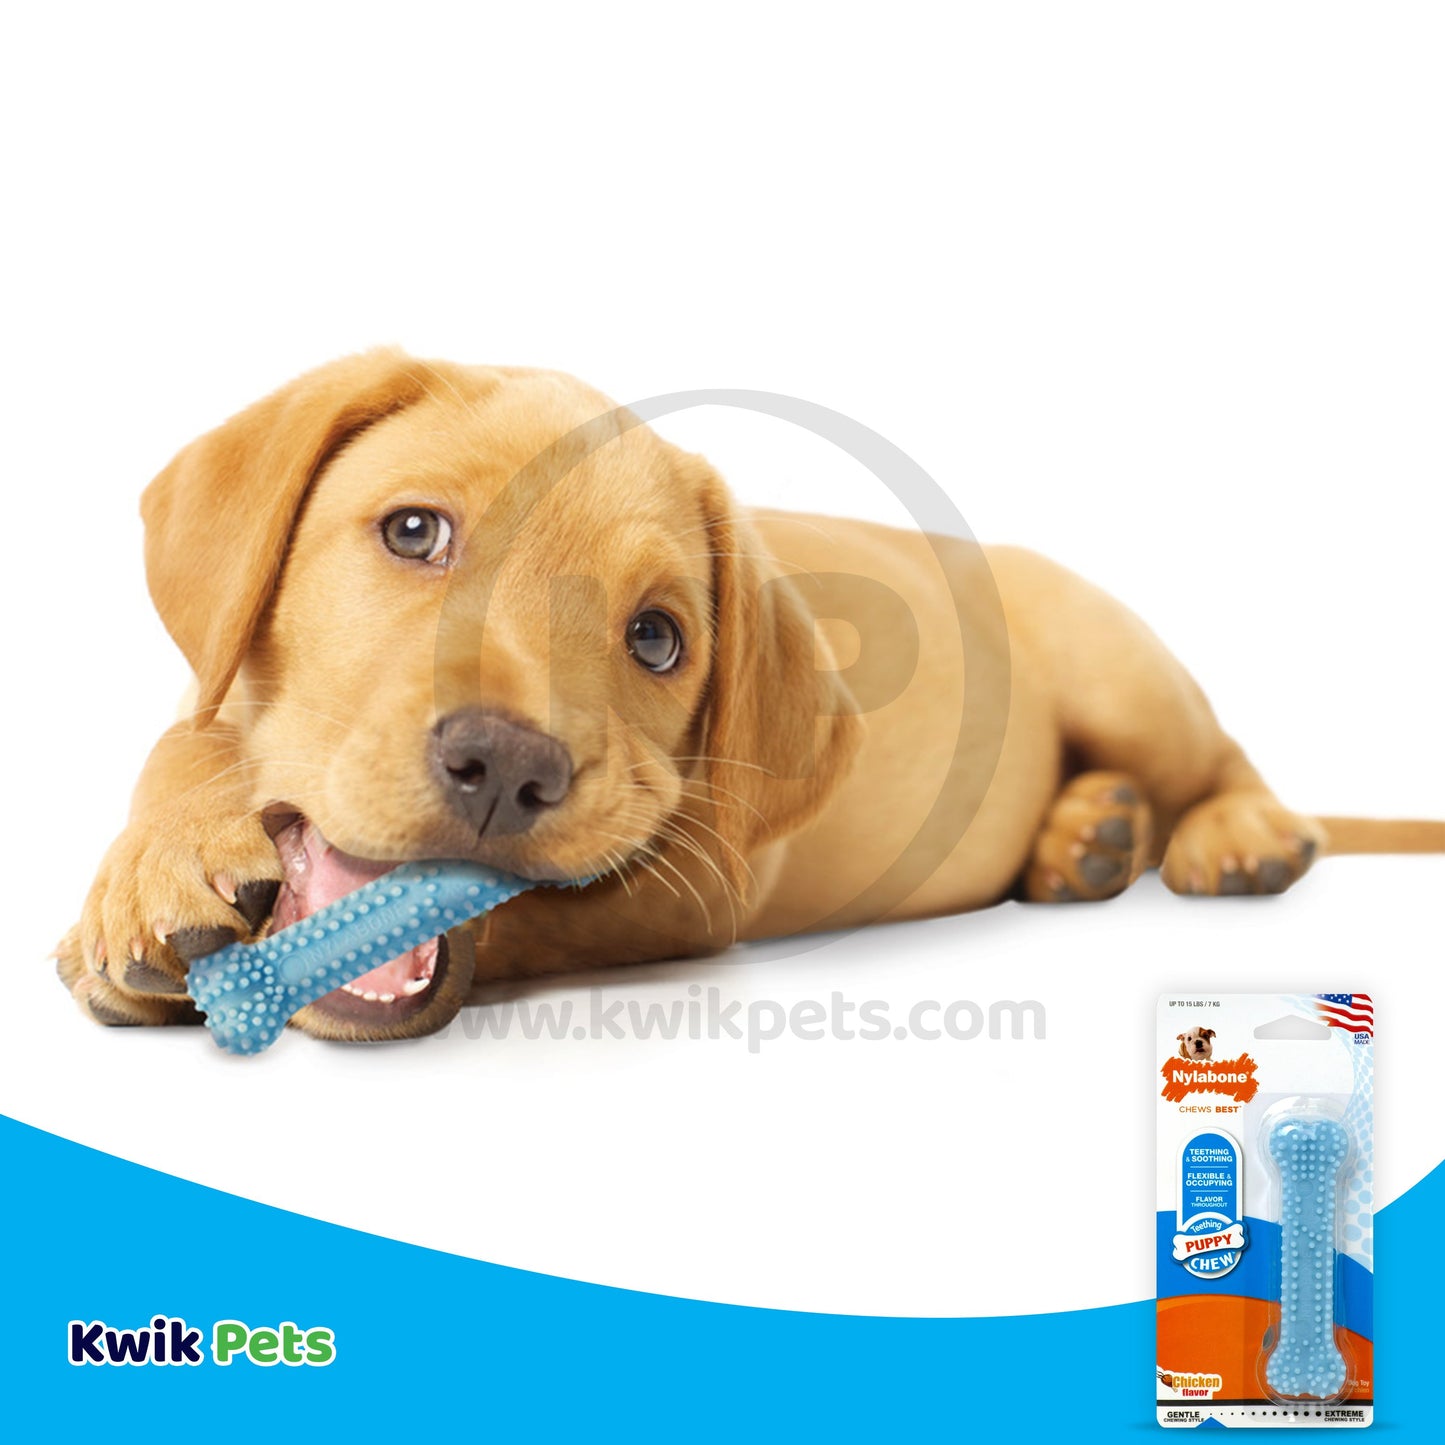 Nylabone Puppy Teething & Soothing Flexible Chew Toy Chicken Flavor X-Small/Petite - Up To 15 lb, Nylabone